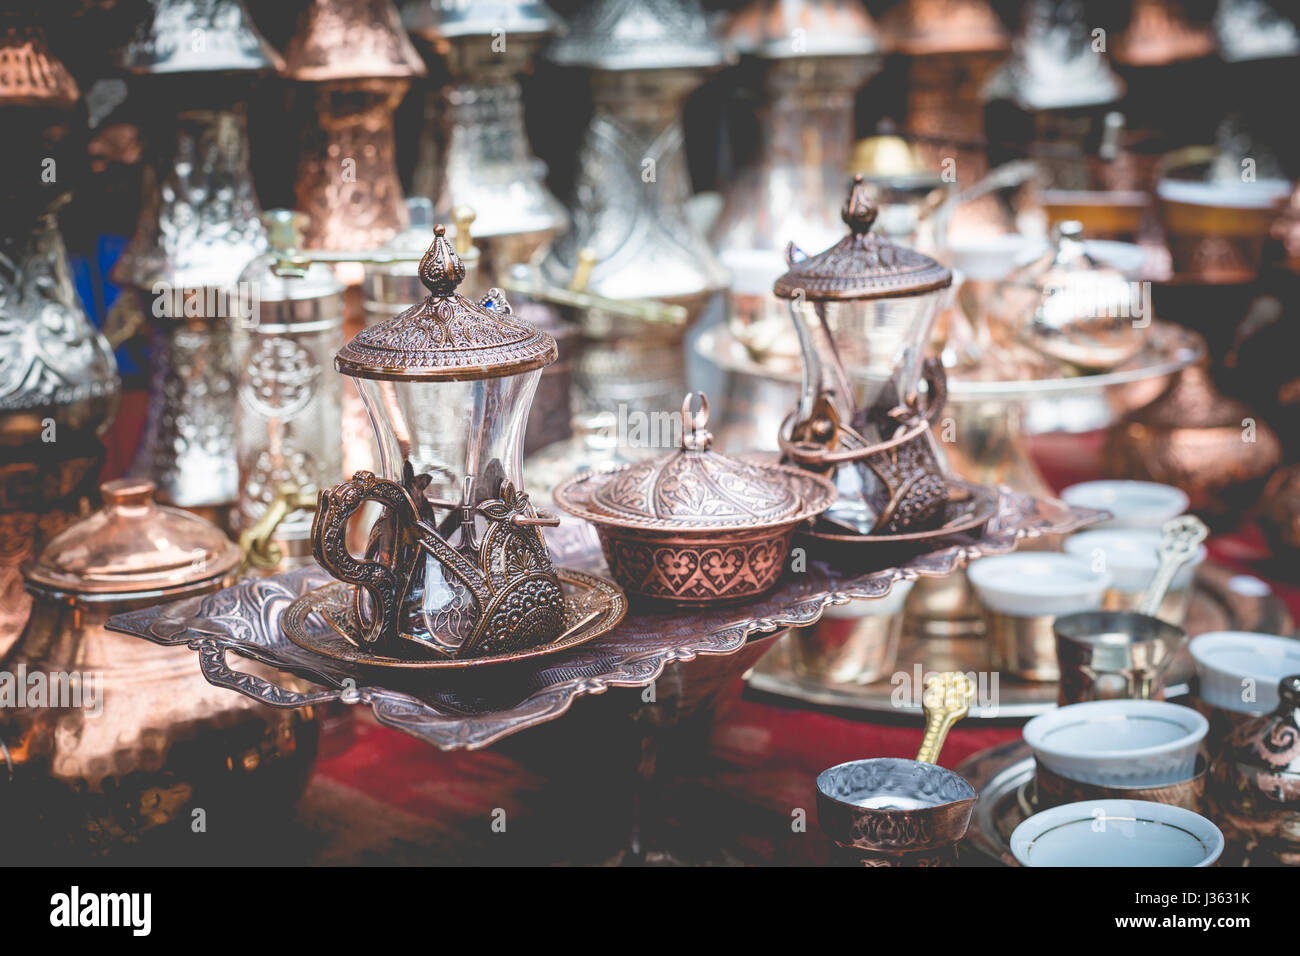 Copper product as souvenir for visitors and tourists in Old Town Sarajevo. Bosnia and Herzegovina. Stock Photo